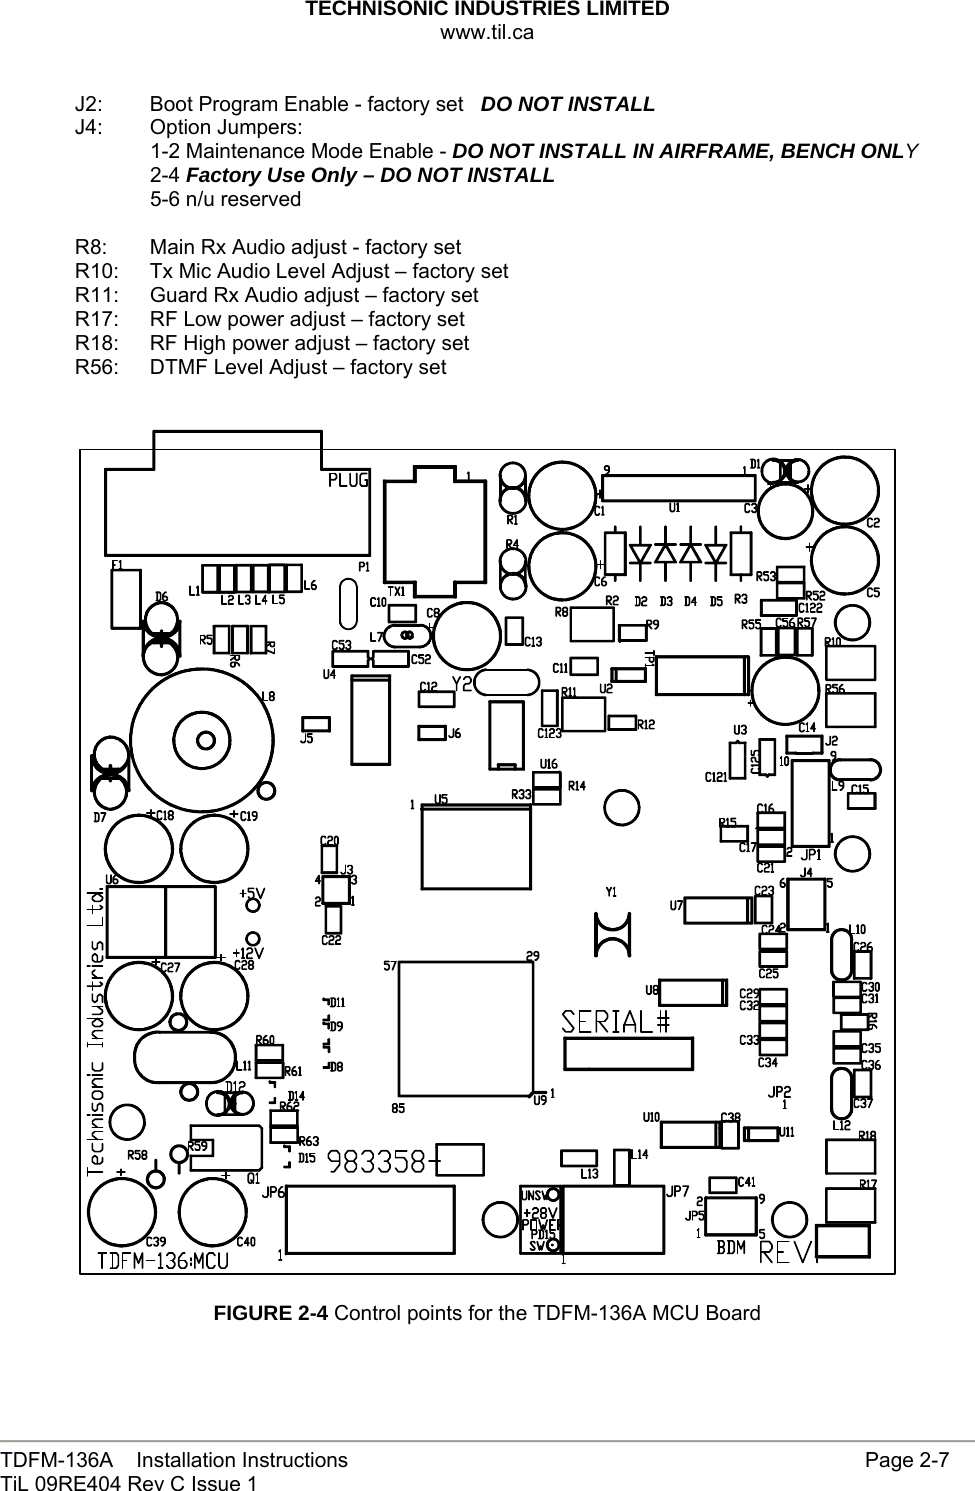 TECHNISONIC INDUSTRIES LIMITED www.til.ca   TDFM-136A    Installation Instructions                     Page 2-7 TiL 09RE404 Rev C Issue 1  J2:  Boot Program Enable - factory set   DO NOT INSTALL J4: Option Jumpers:   1-2 Maintenance Mode Enable - DO NOT INSTALL IN AIRFRAME, BENCH ONLY  2-4 Factory Use Only – DO NOT INSTALL   5-6 n/u reserved  R8:  Main Rx Audio adjust - factory set R10:  Tx Mic Audio Level Adjust – factory set R11:   Guard Rx Audio adjust – factory set R17:  RF Low power adjust – factory set R18:  RF High power adjust – factory set R56:  DTMF Level Adjust – factory set     FIGURE 2-4 Control points for the TDFM-136A MCU Board  